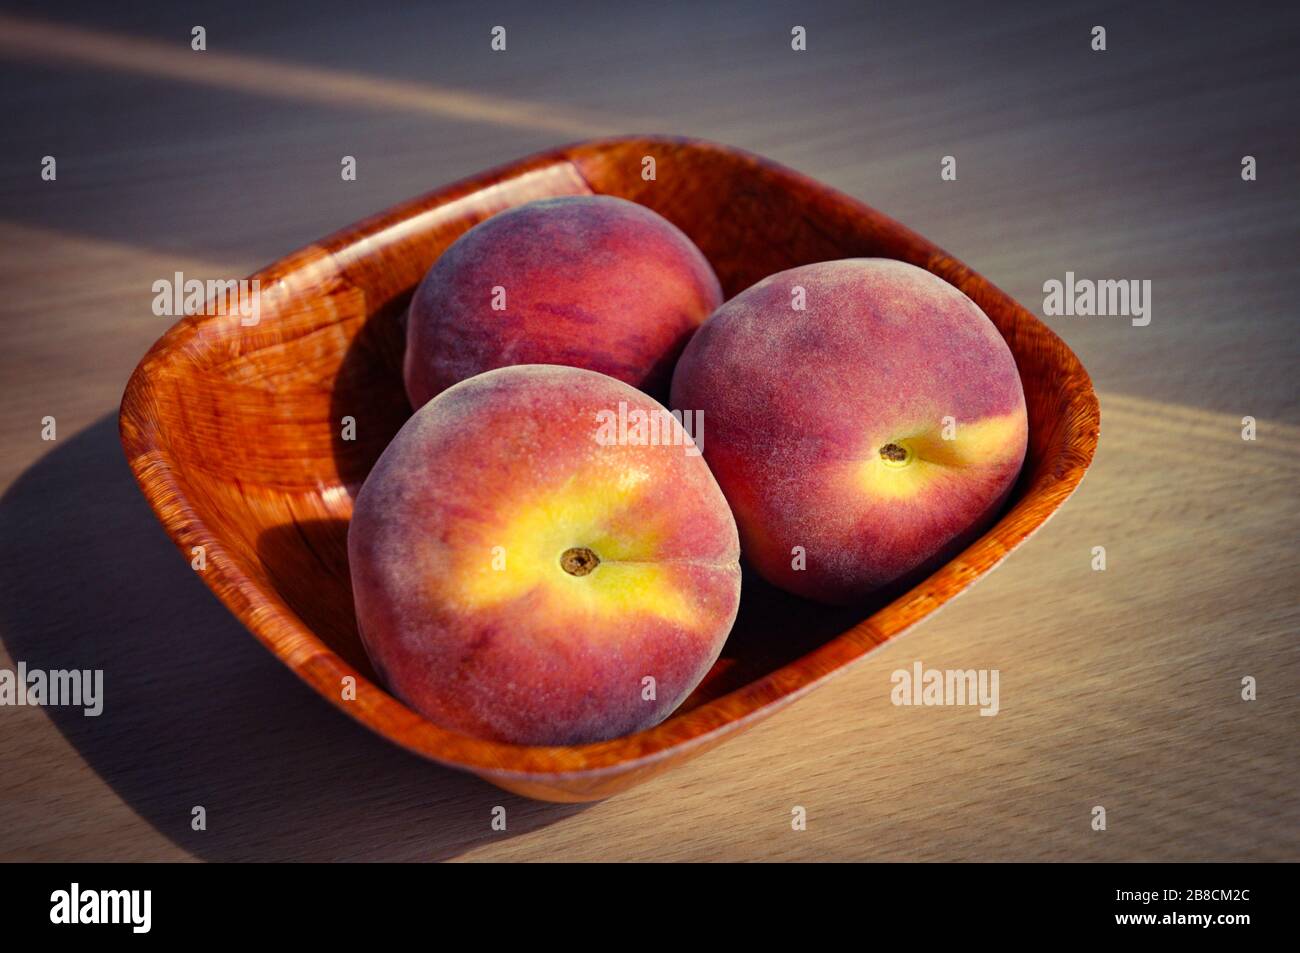 Still life with wooden bowl with three ripe peaches Stock Photo